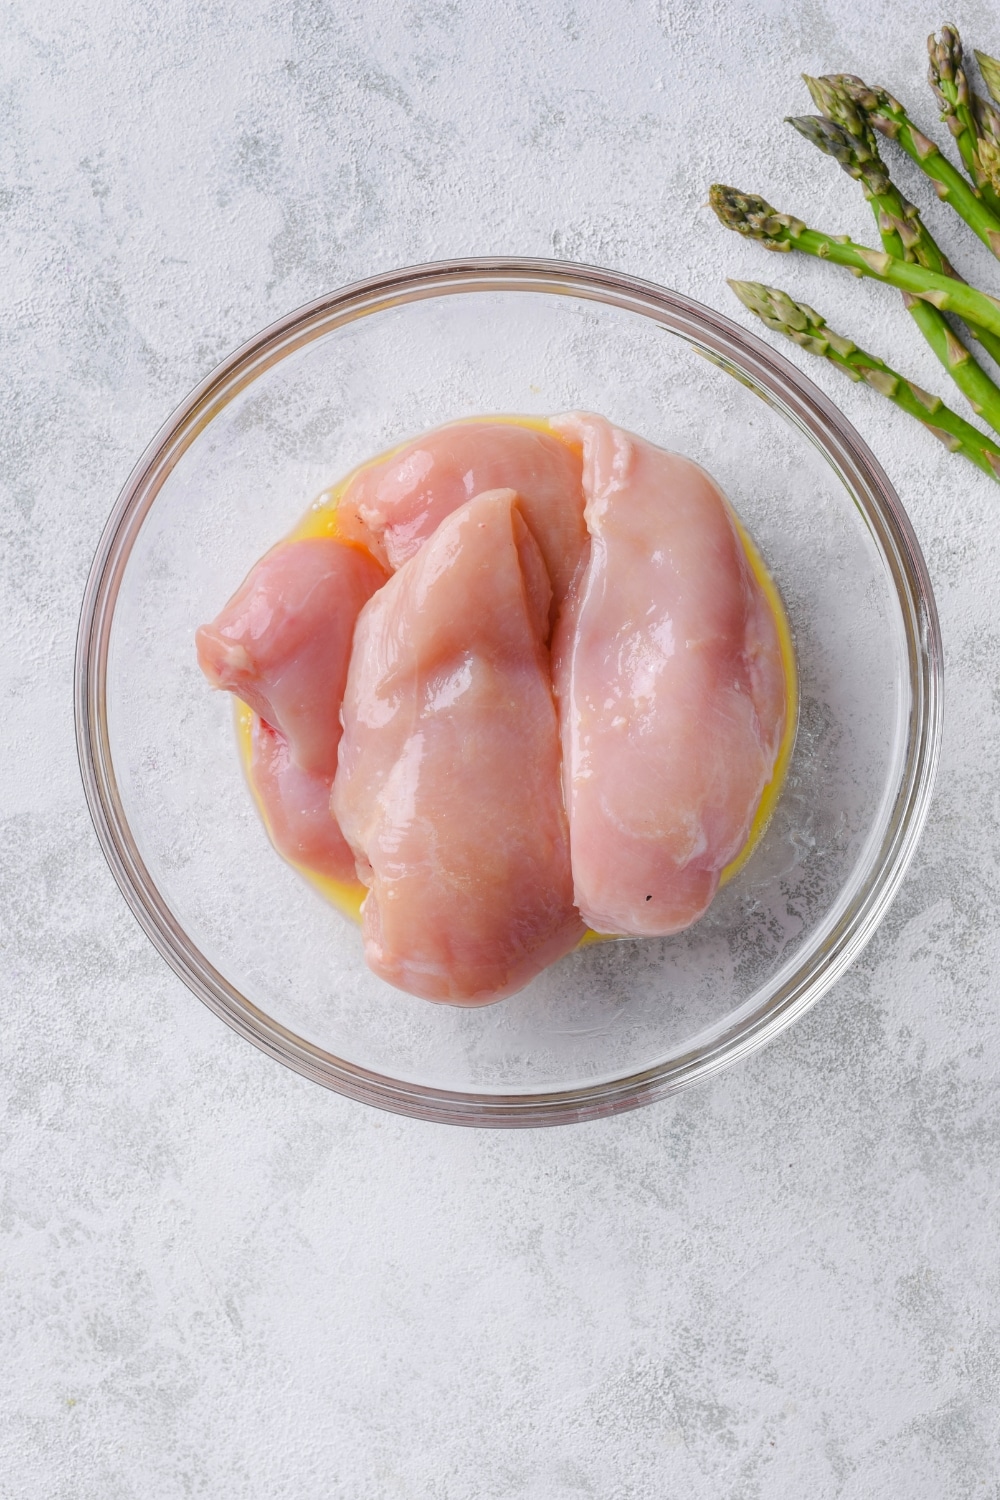 Raw chicken breasts and melted butter in a glass bowl.